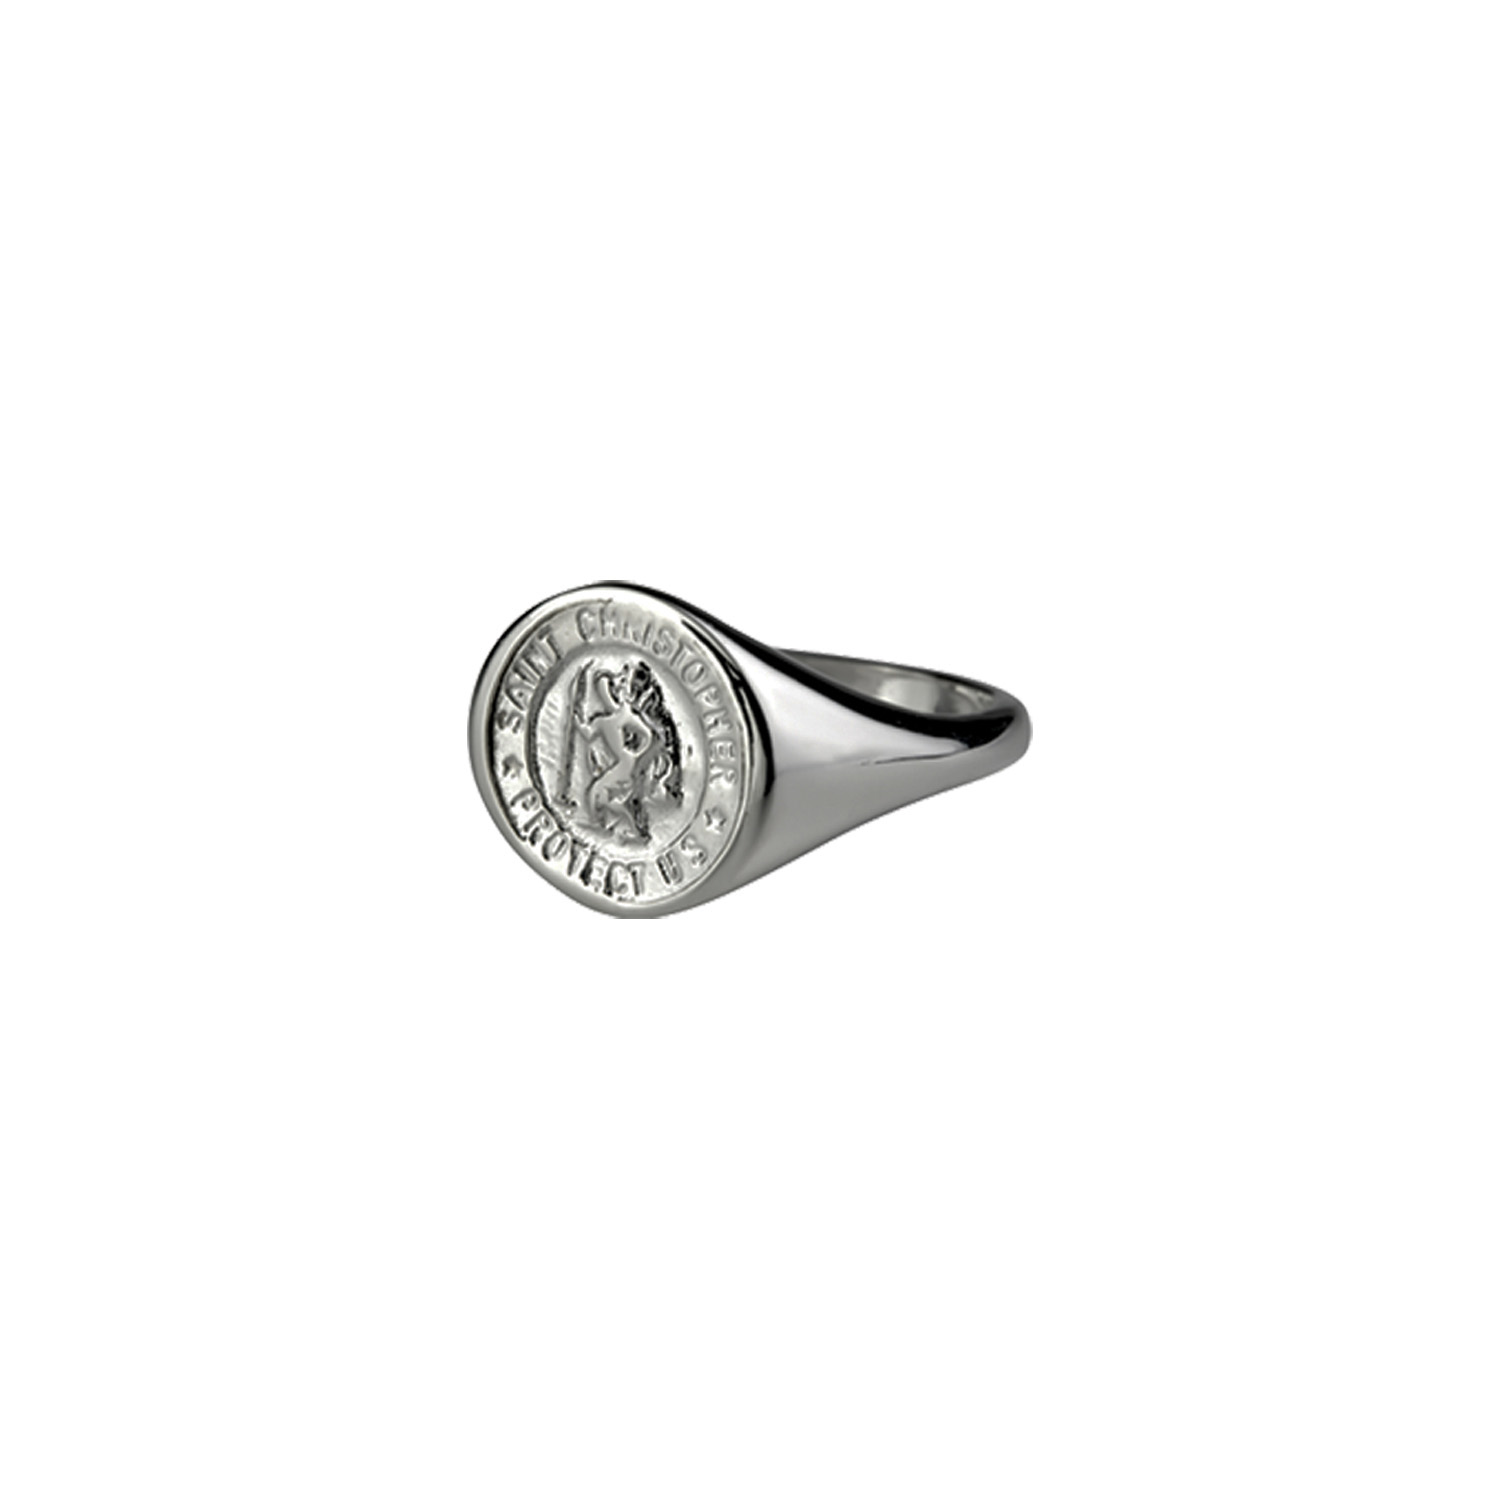 St. Christopher Sterling Silver Signet Ring